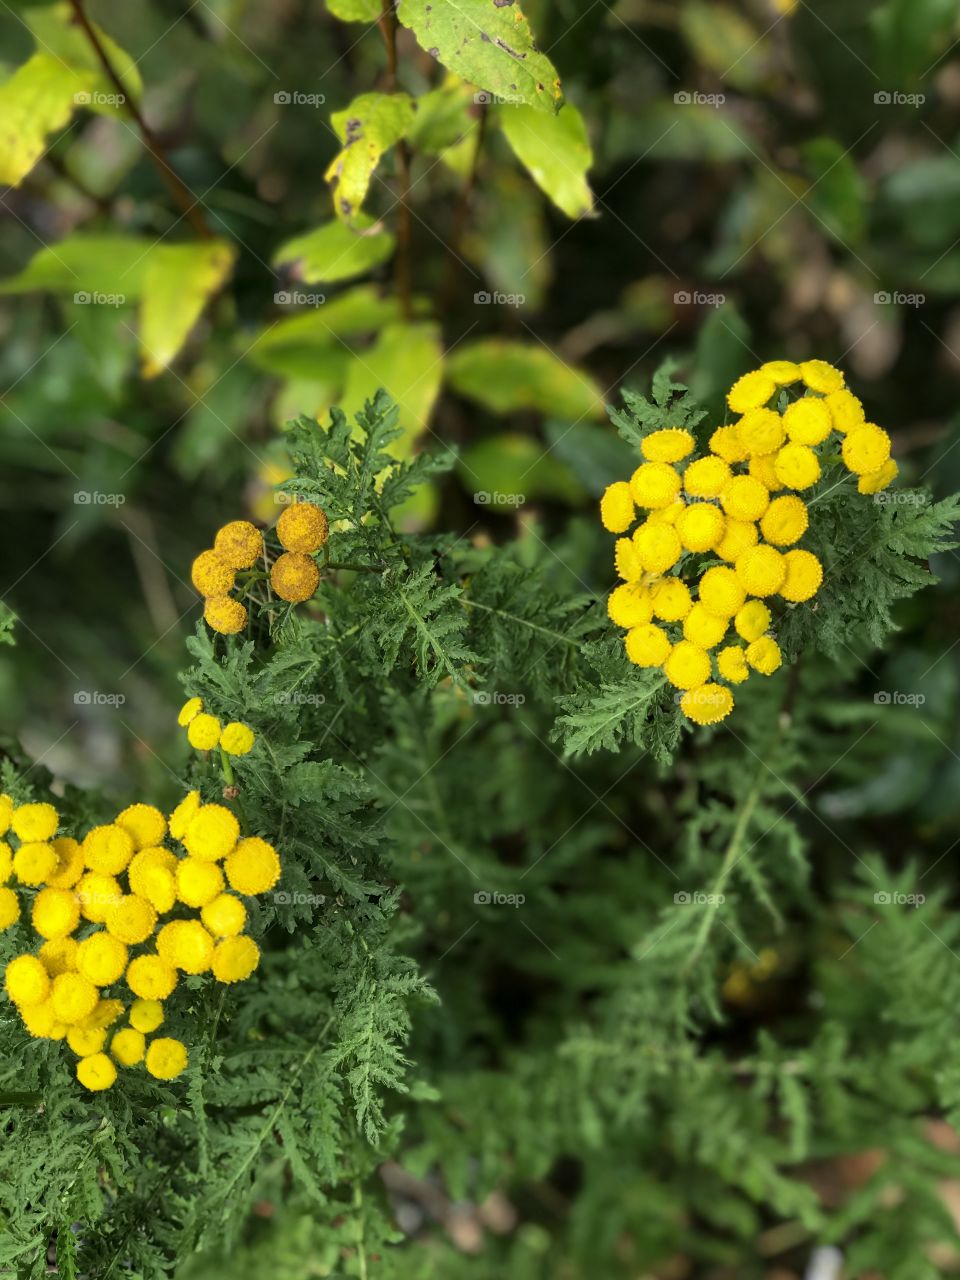 Common tansy (Tanacetum vulgare) is a perennial & is an invasive weed in Western Canada. It over-competes native species due to its prolific spread primarily through seed dispersion. Seeds from this plant can remain viable for 25 years. 